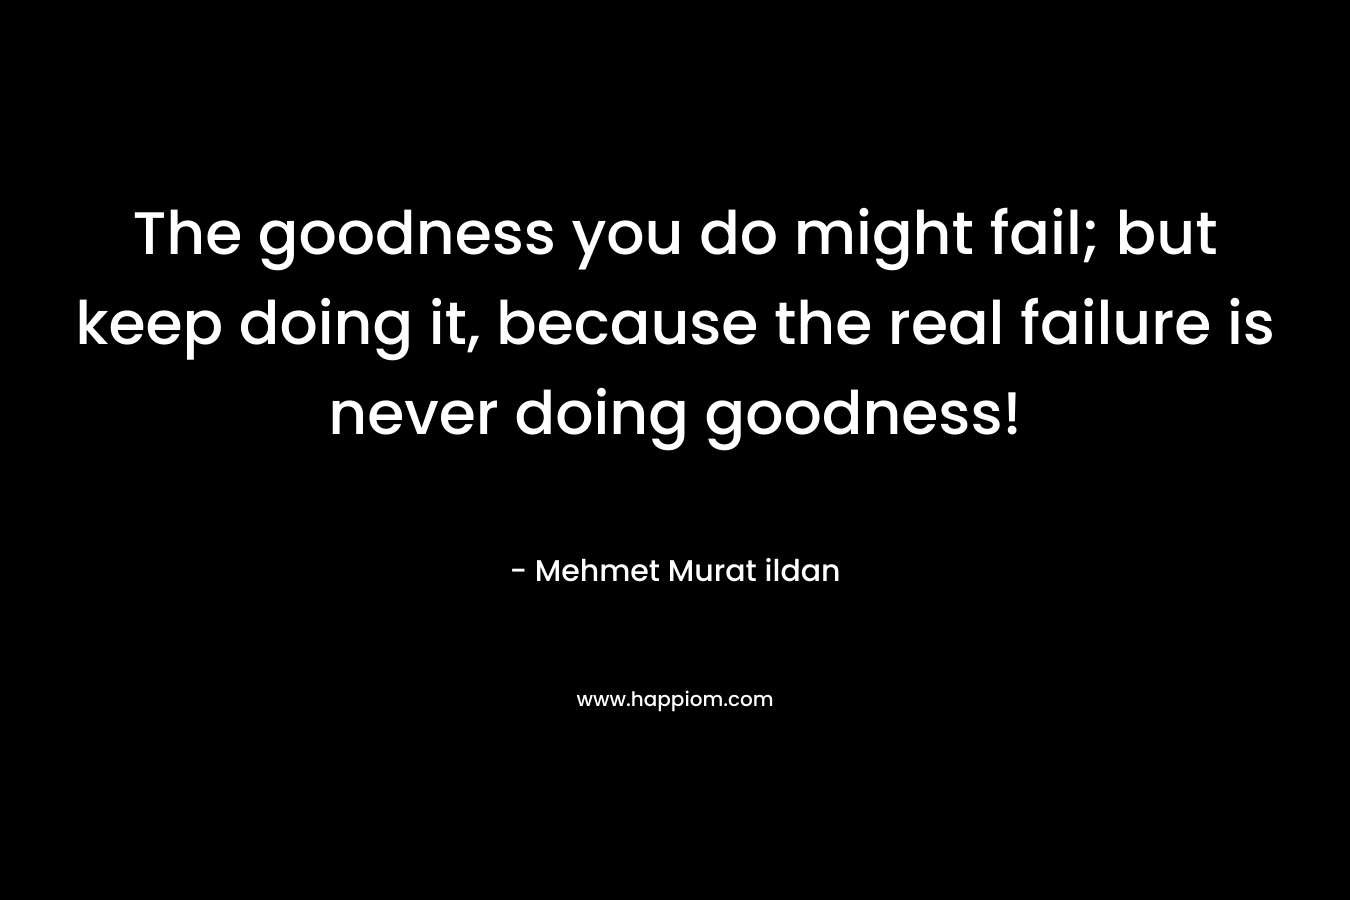 The goodness you do might fail; but keep doing it, because the real failure is never doing goodness!